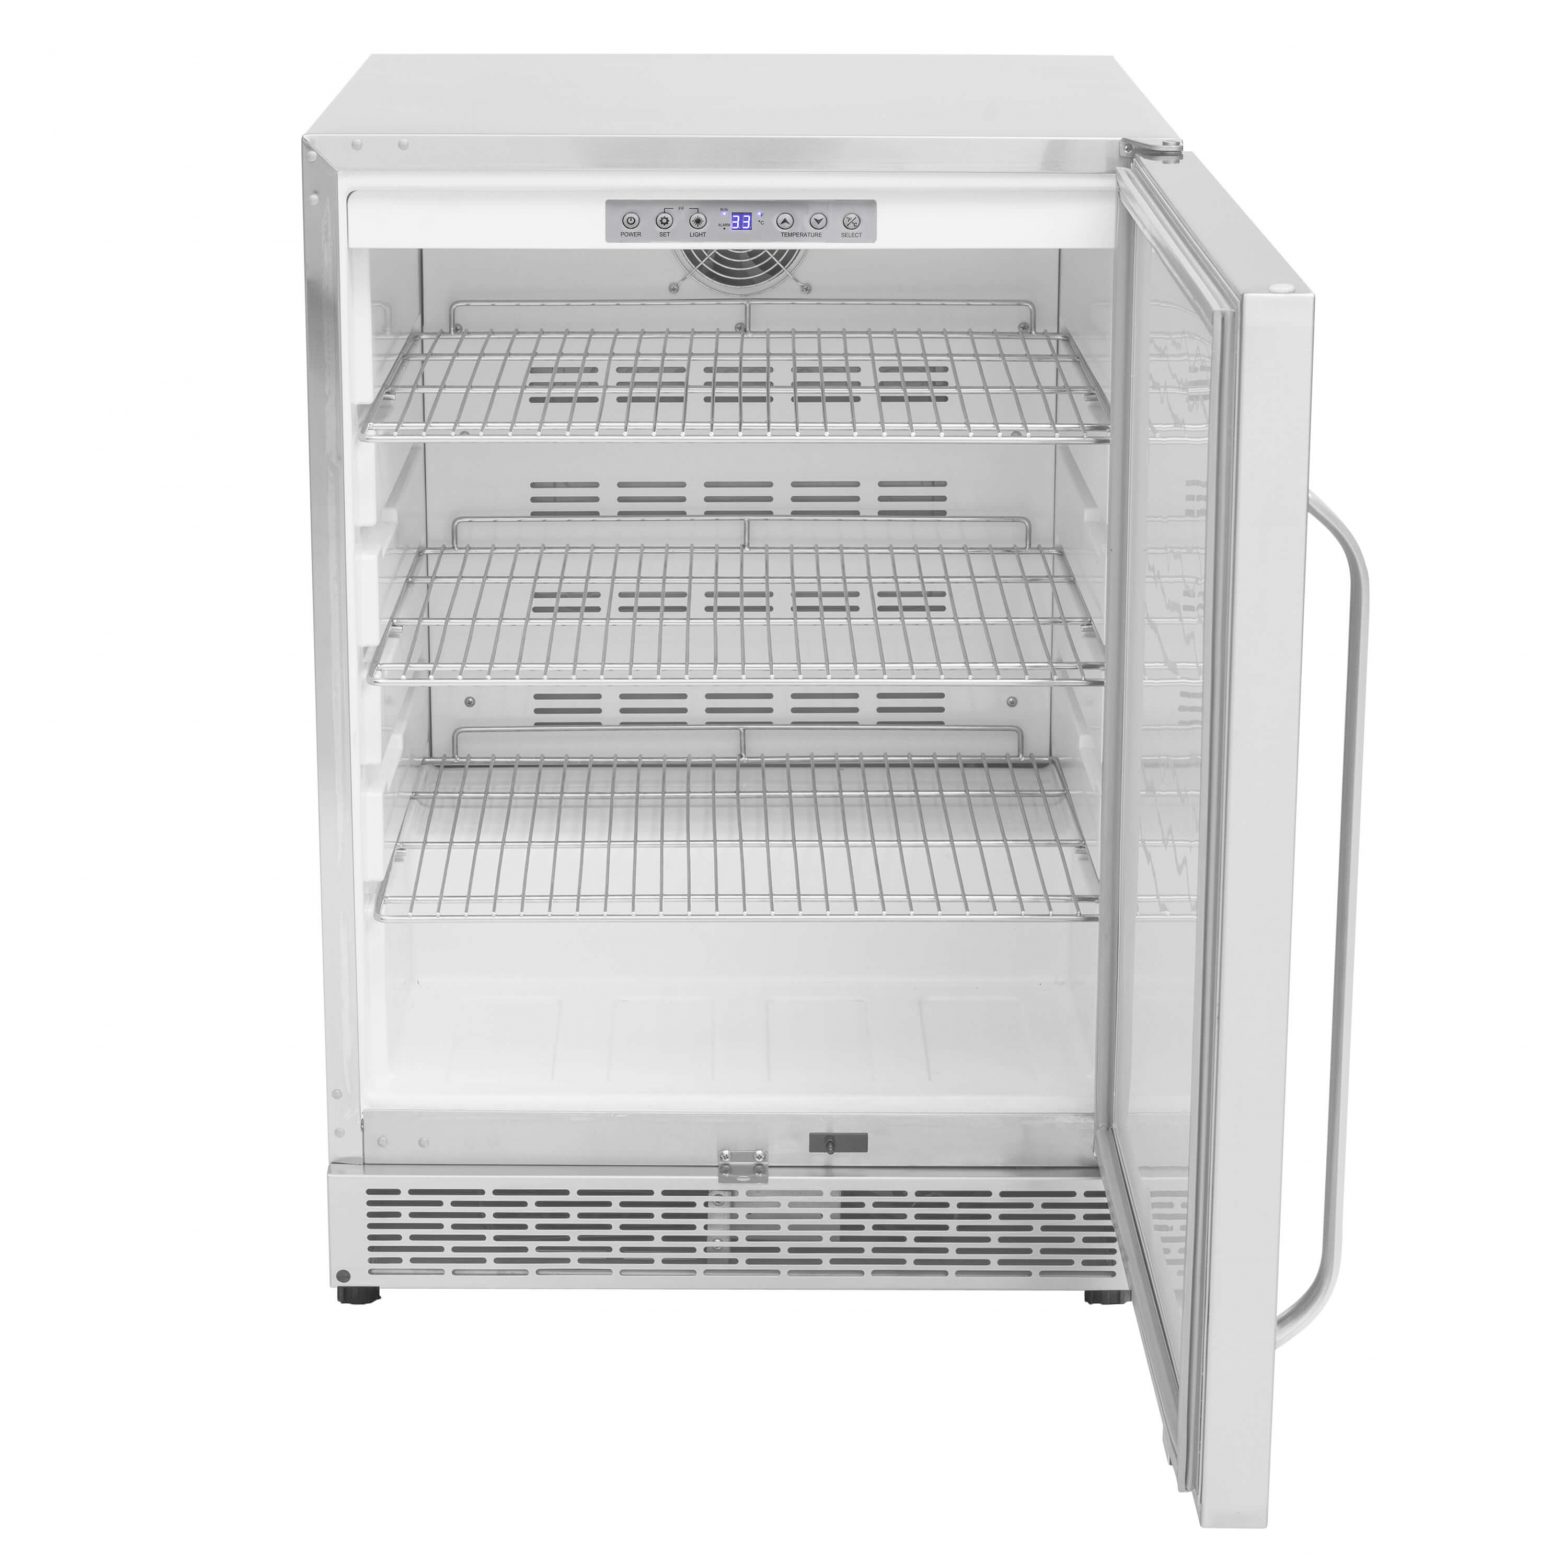 Whynter 24″ Built-in Outdoor 5.3cu.ft. Beverage Refrigerator Cooler Full Stainless Steel Exterior with Lock and Caster Wheels BOR-53024-SSW User Manual